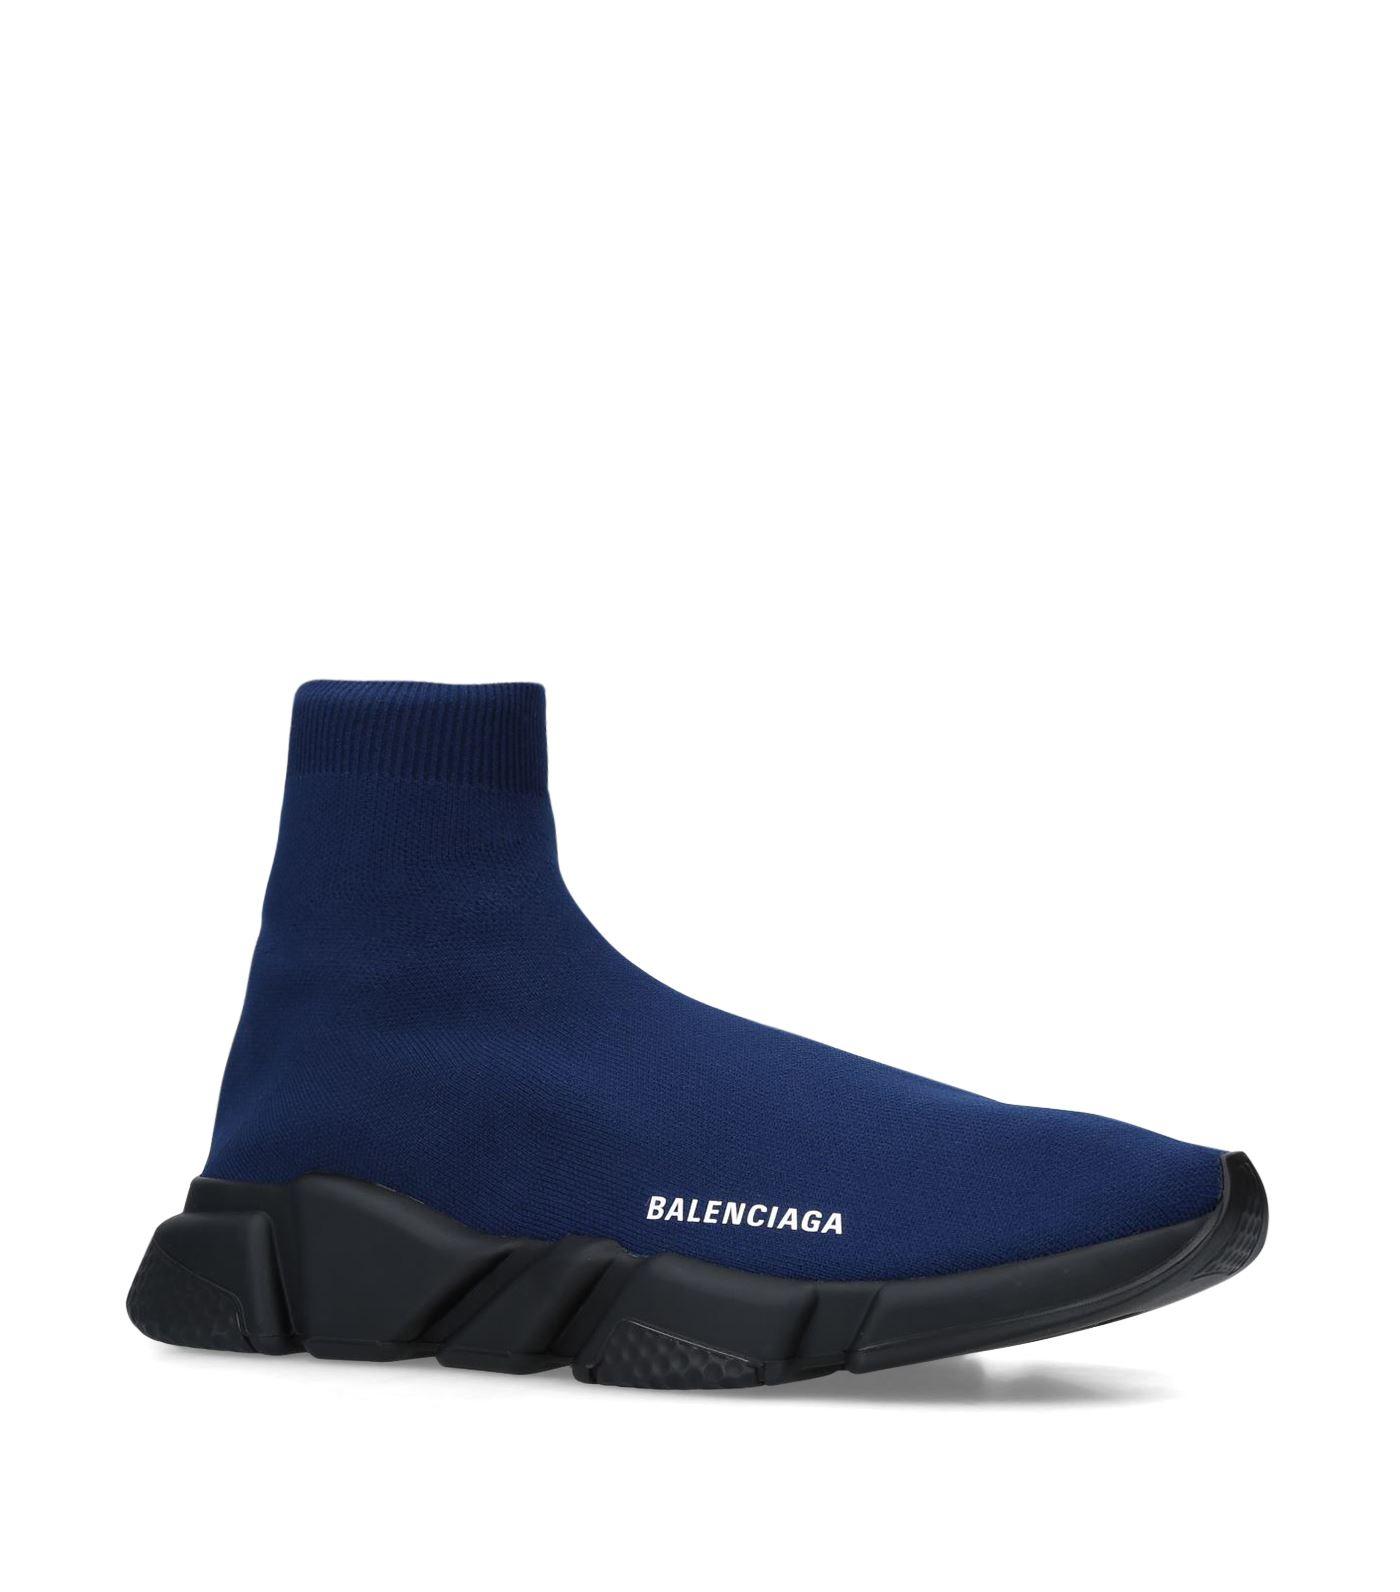 Balenciaga Speed Low-top Sneakers in Blue for Men - Lyst